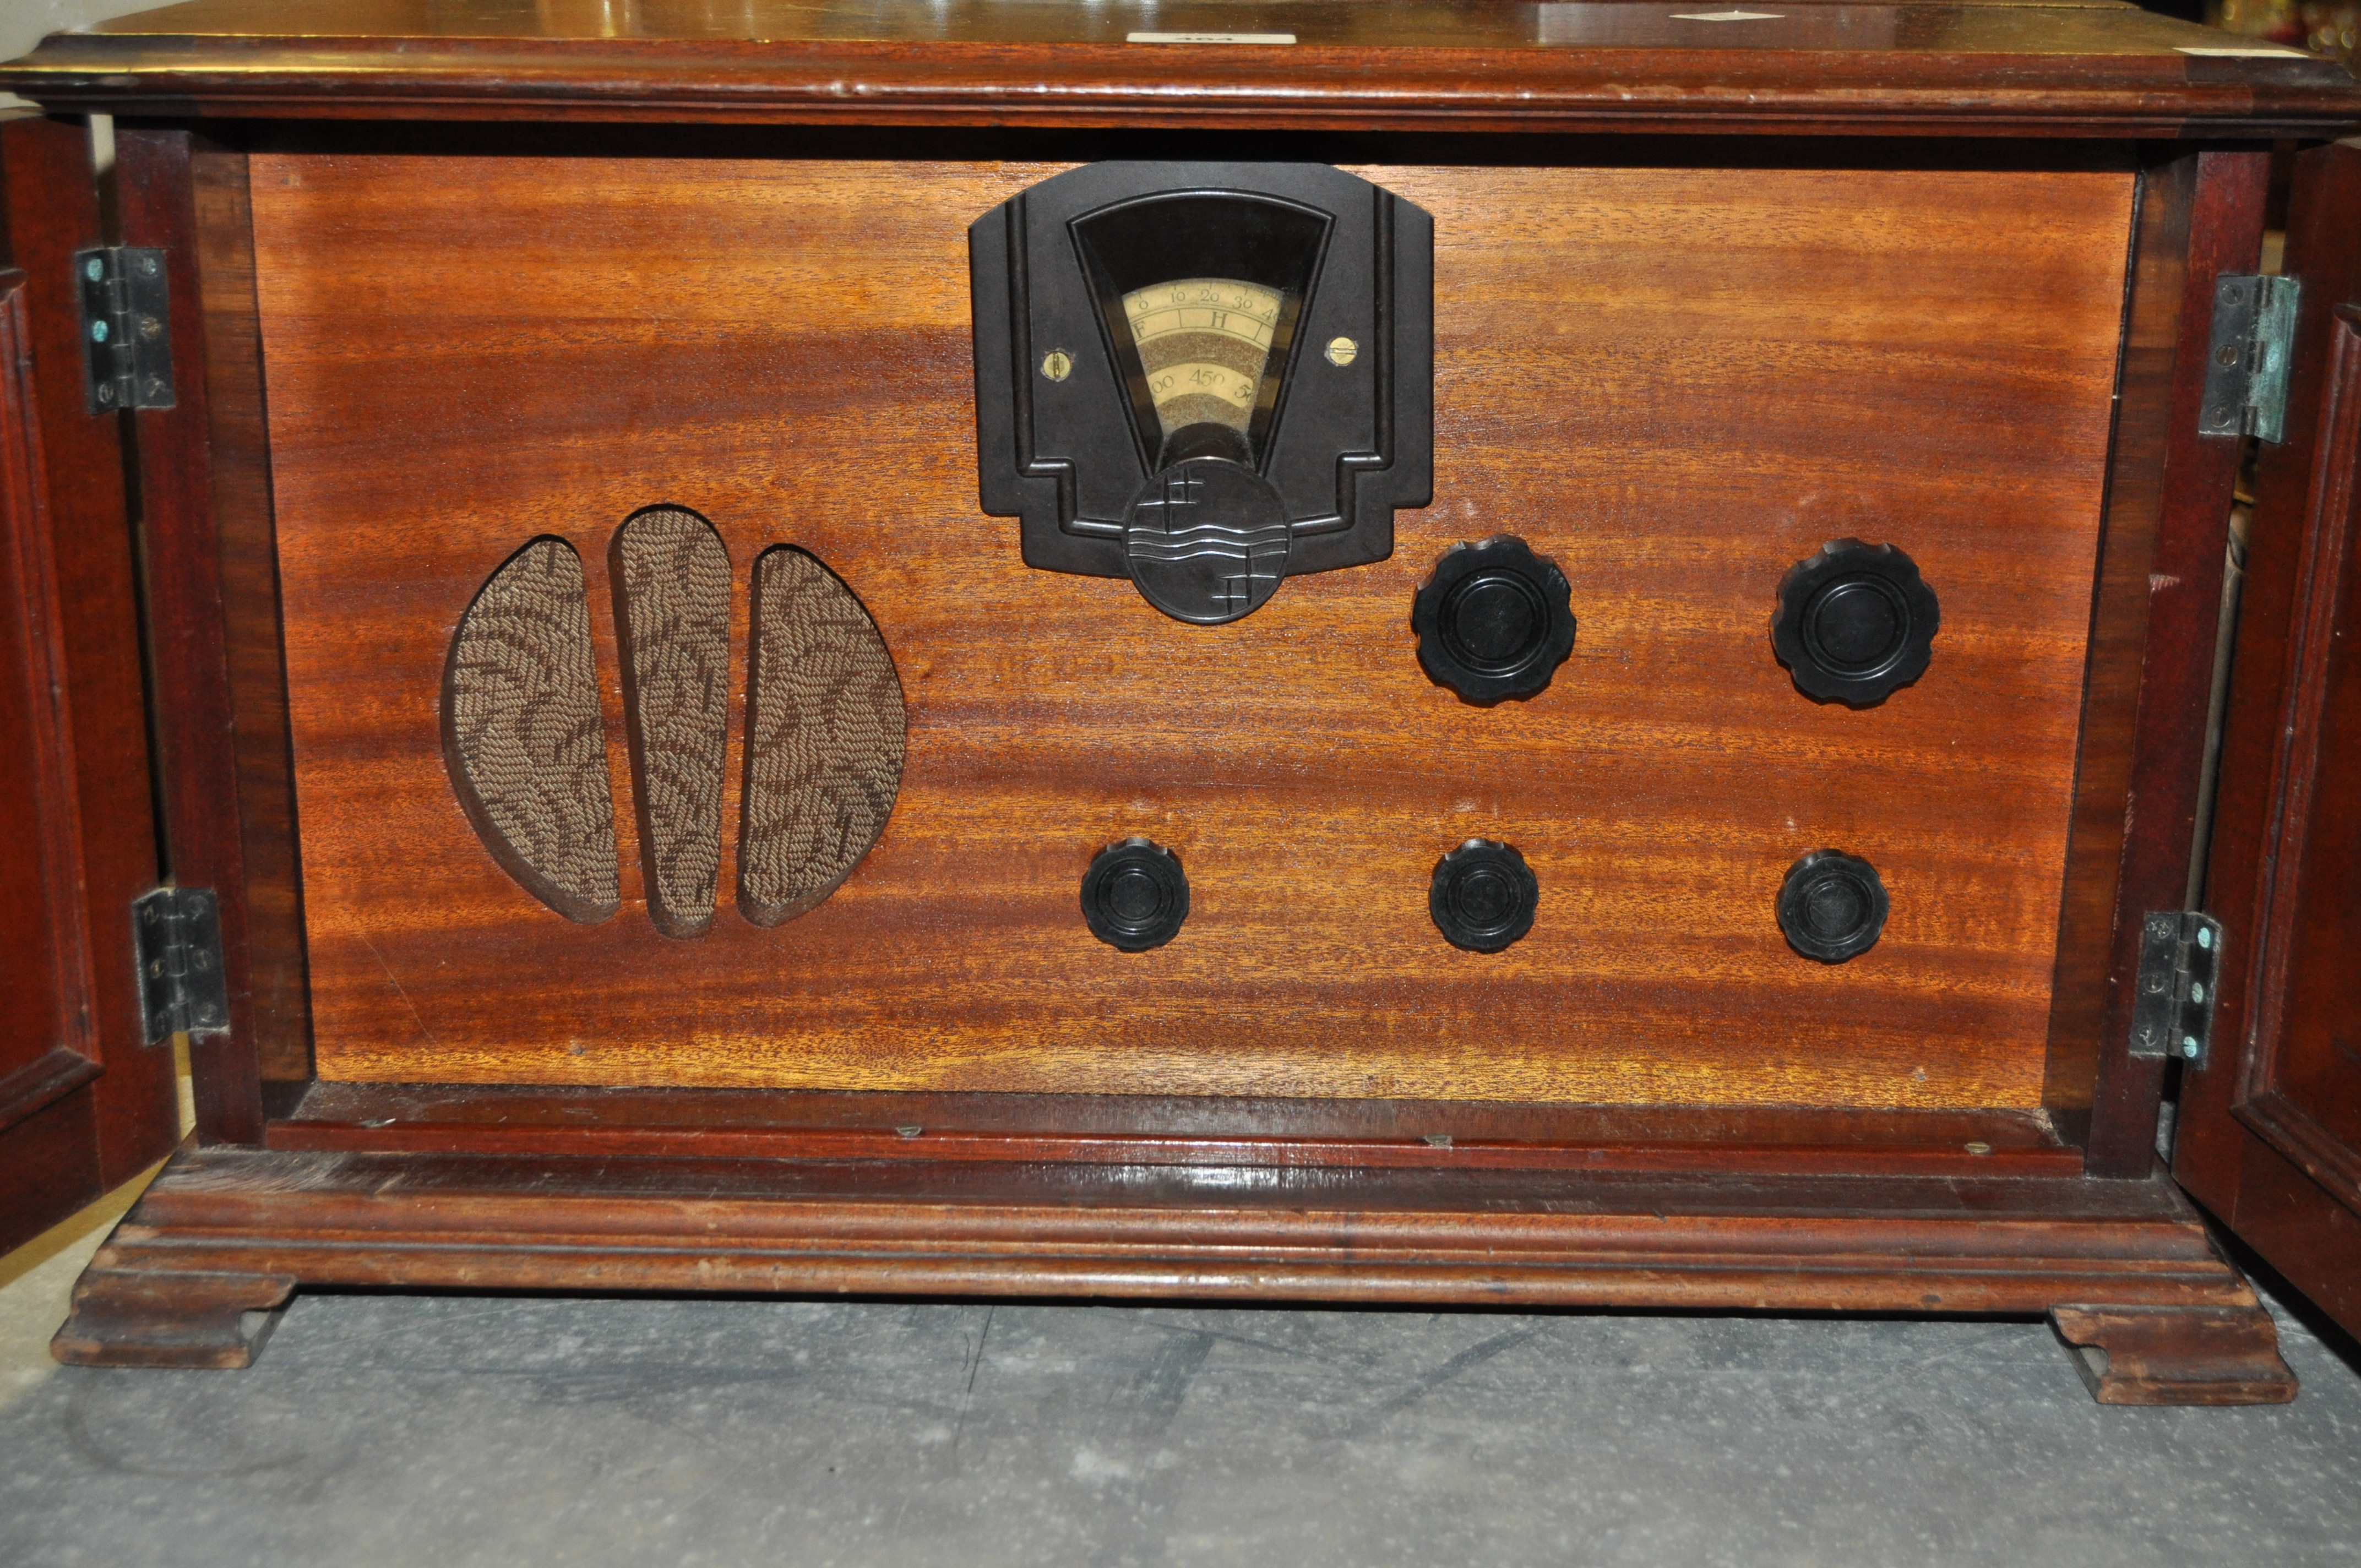 Vintage radio in a mahogany box, first half of the 20th century, with Bakelite dial, - Image 2 of 4